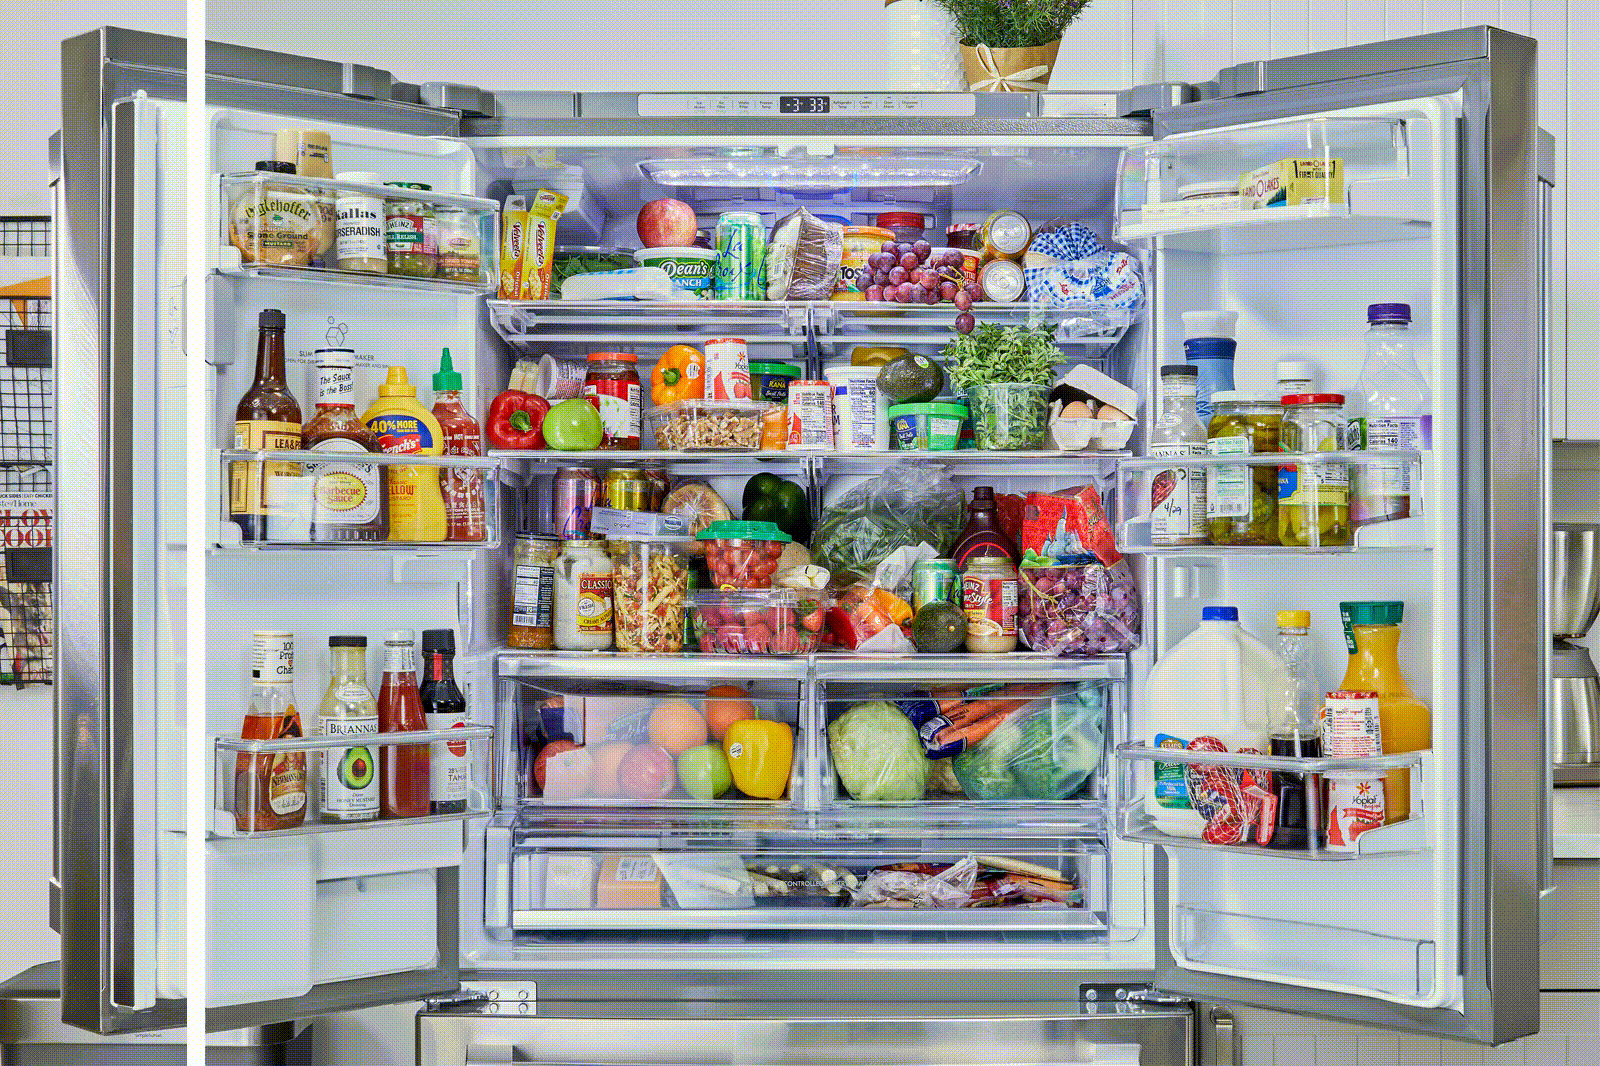 https://www.selection.ca/wp-content/uploads/2022/12/Organiser-son-refrigerateur.gif